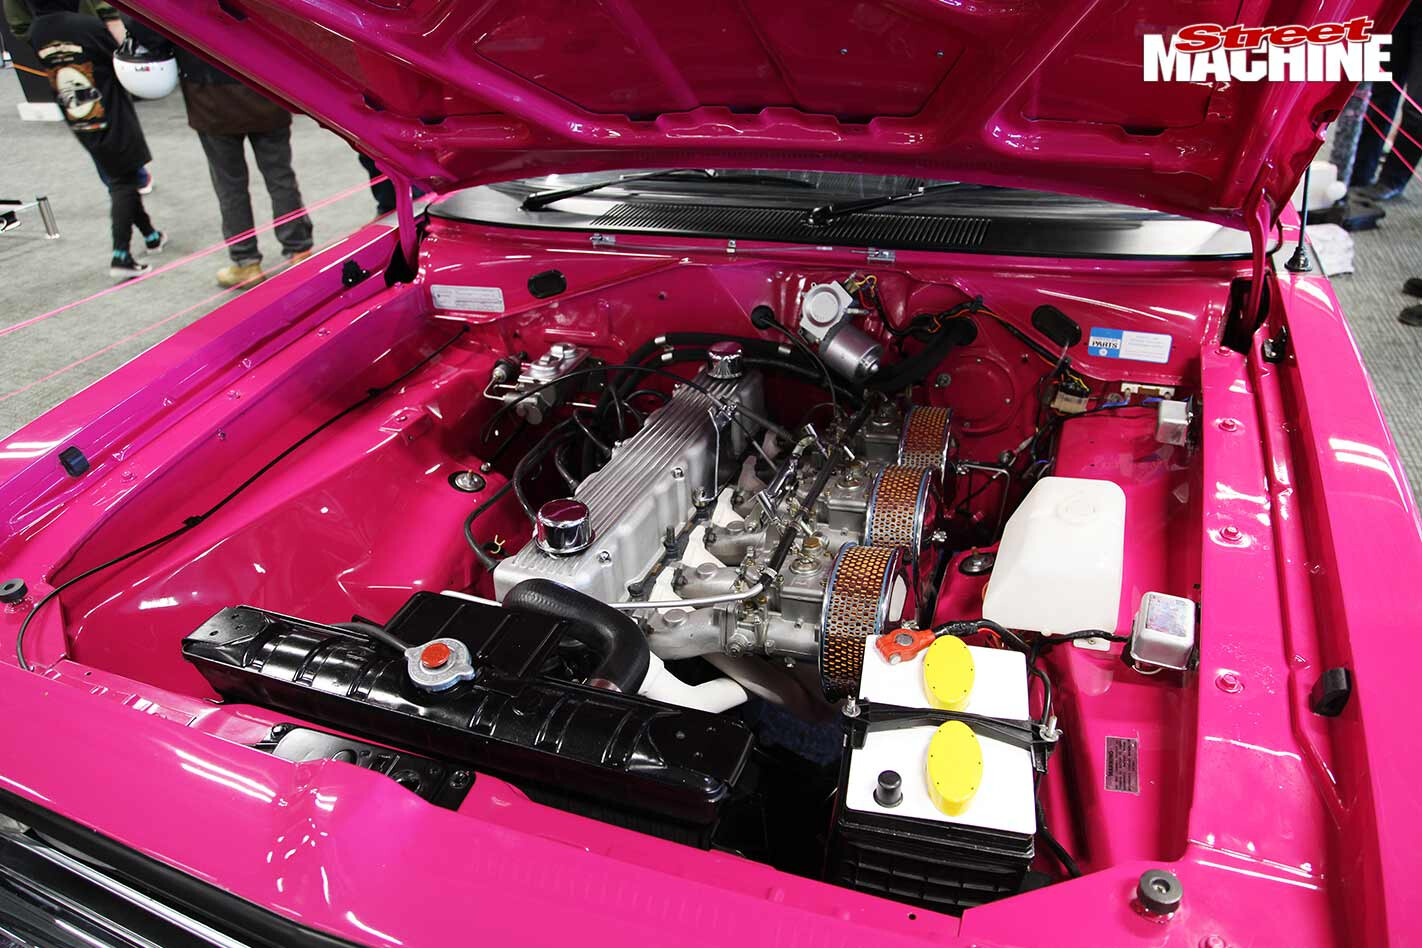 Charger engine bay